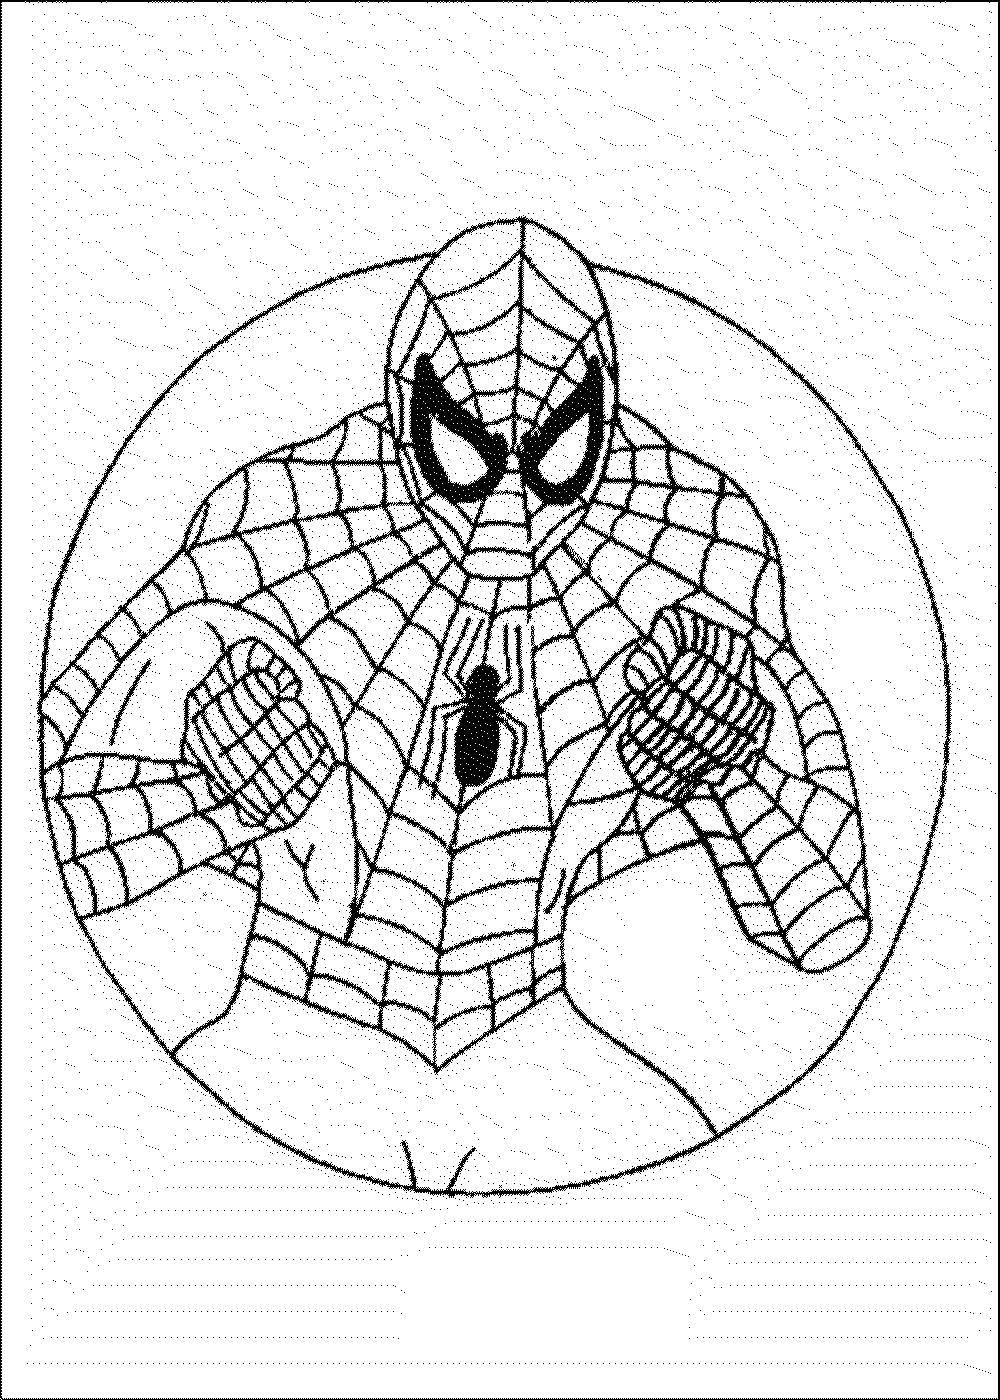 Coloring Spider-man. Category For boys . Tags:  film, cartoon, Spiderman, Spiderman.